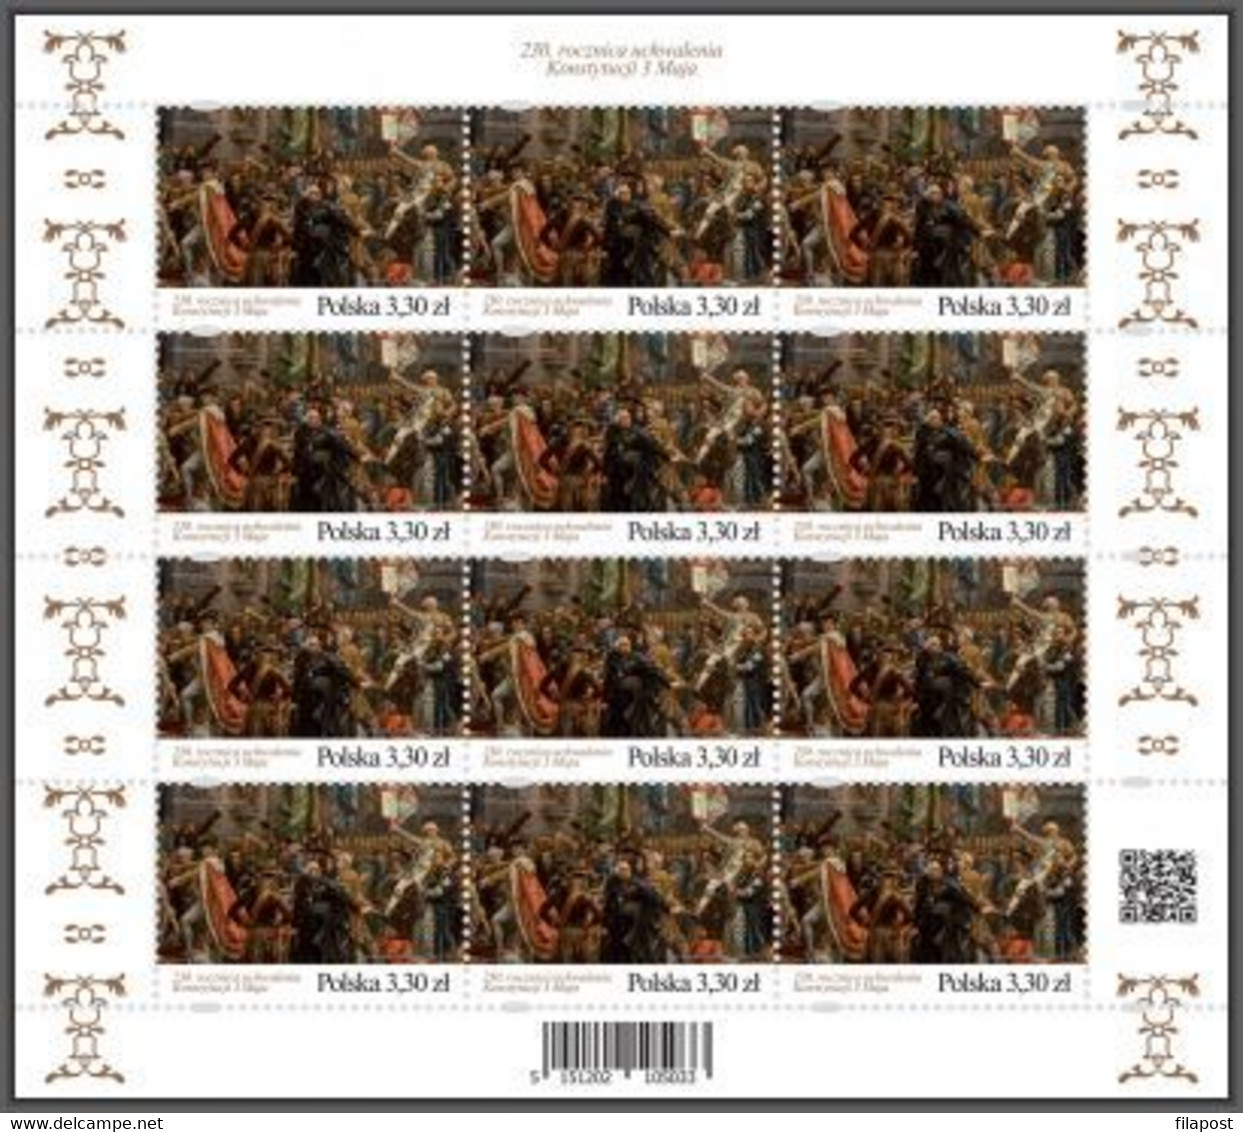 Poland 2021 / 230th Anniversary Of The 3rd Of May Constitution, Jan Matejko Work, Art, Royal Castle Warsaw /MNH** New!!! - Full Sheets